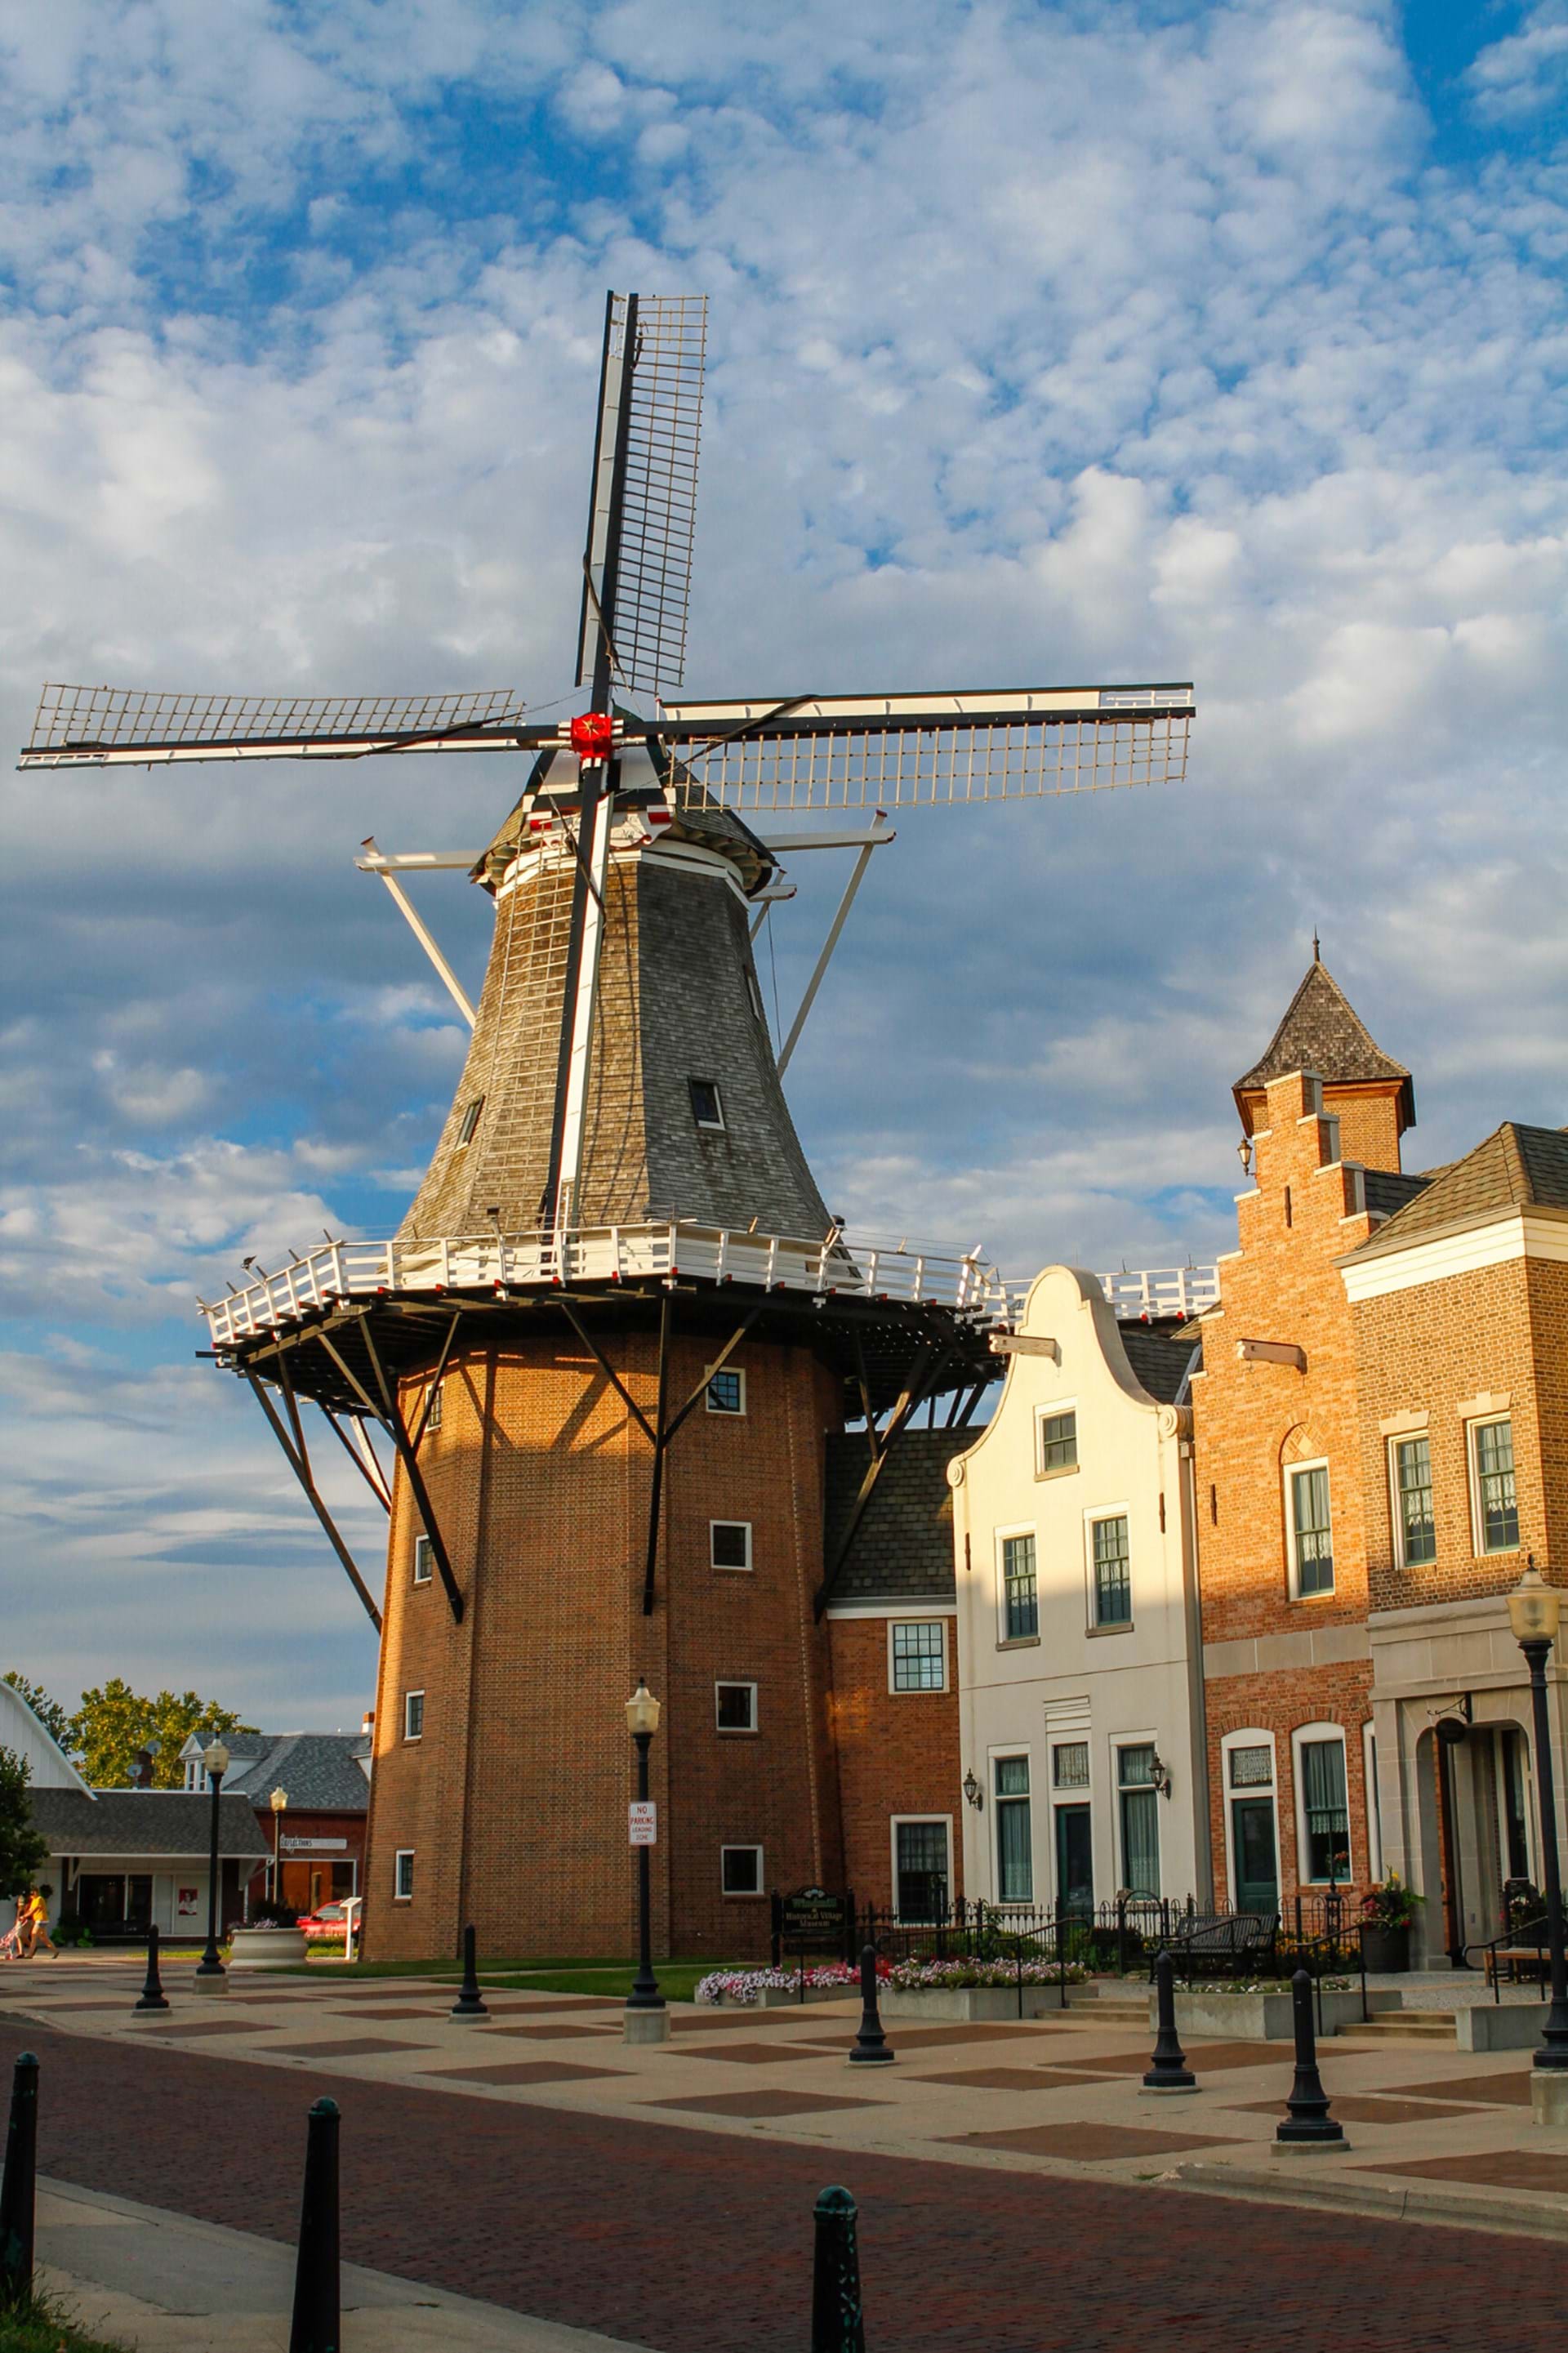 The Vermeer Windmill is open for guided tours throughout the season.